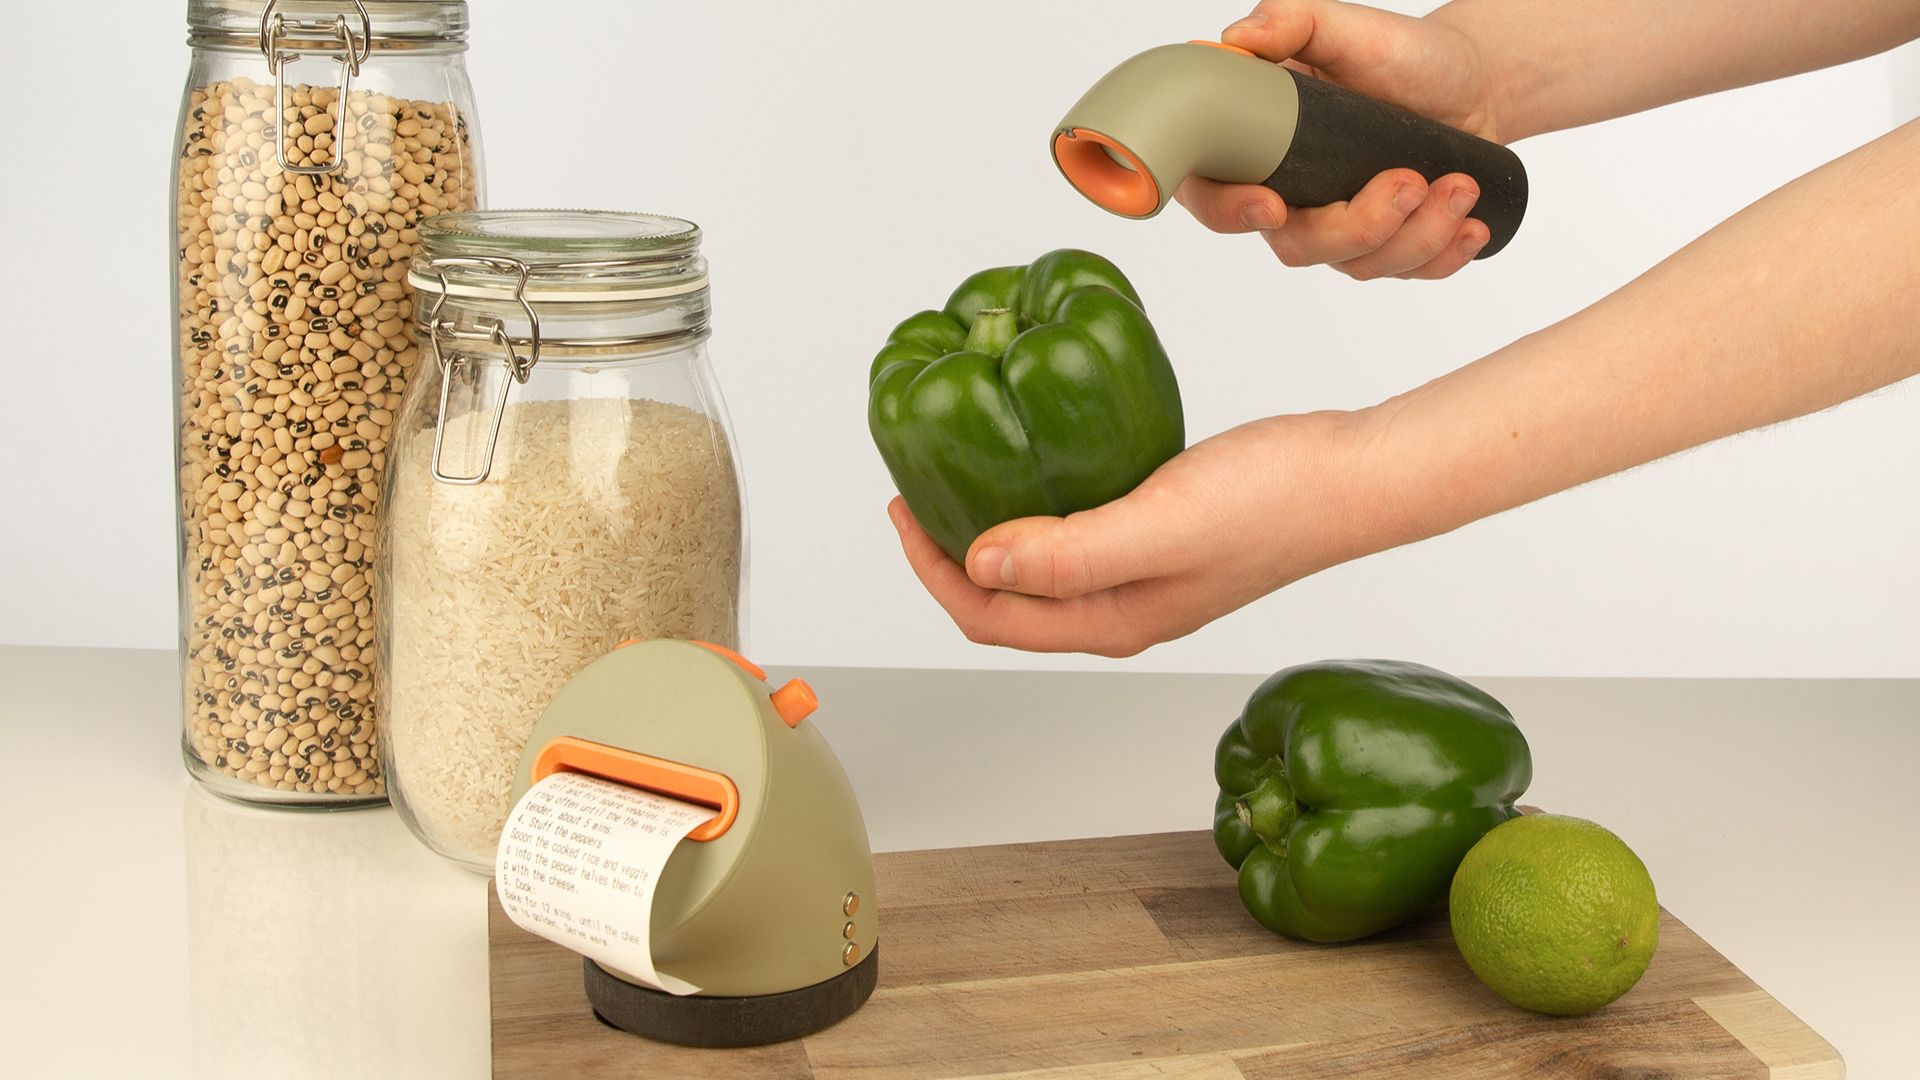 Eco-friendly kitchen products: 6 ideas for a sustainable future